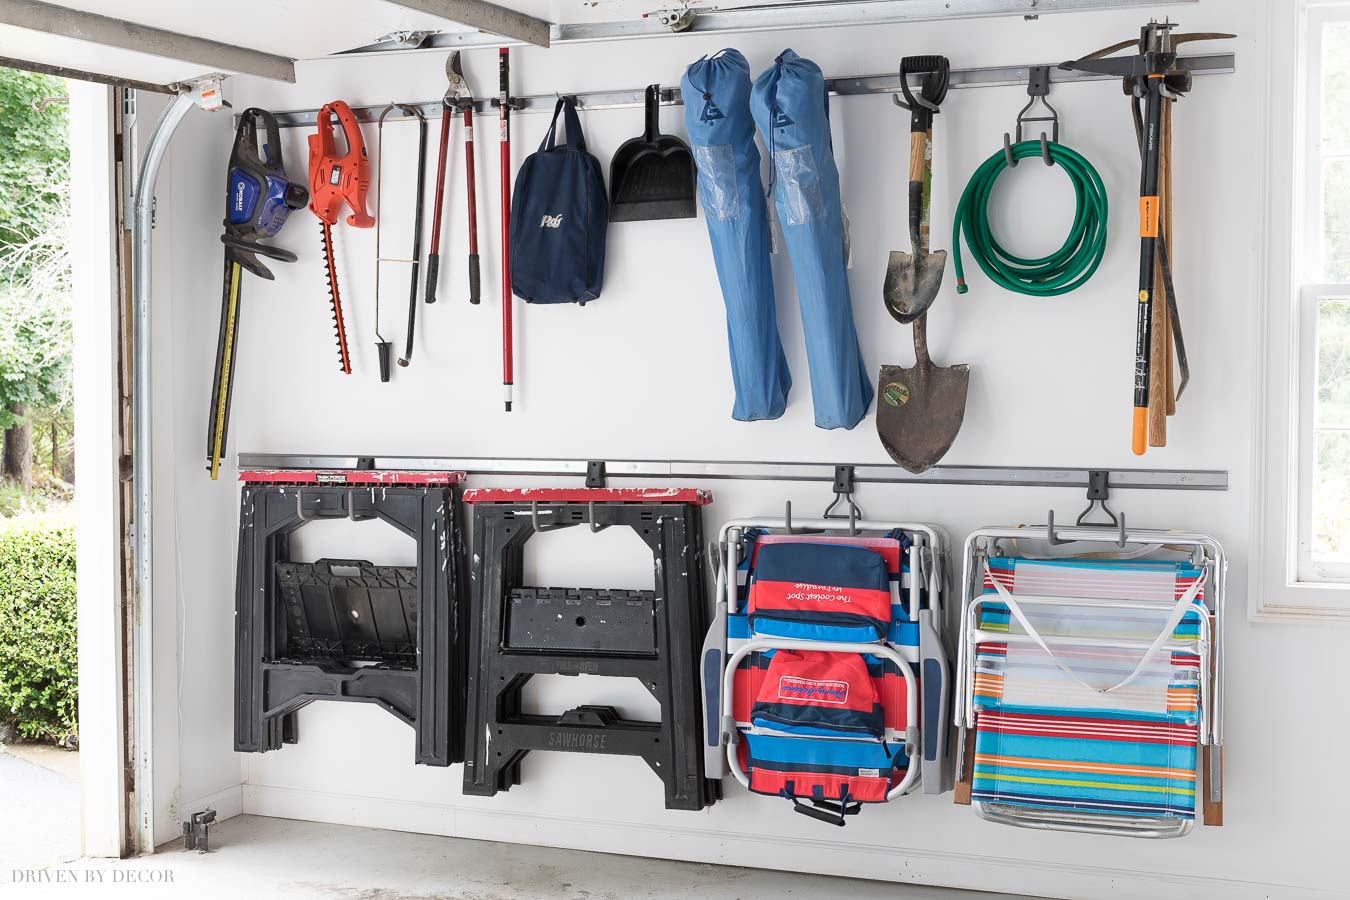 I'm getting so many ideas for organizing our garage from this post! Love this Elfa system for hanging tools!